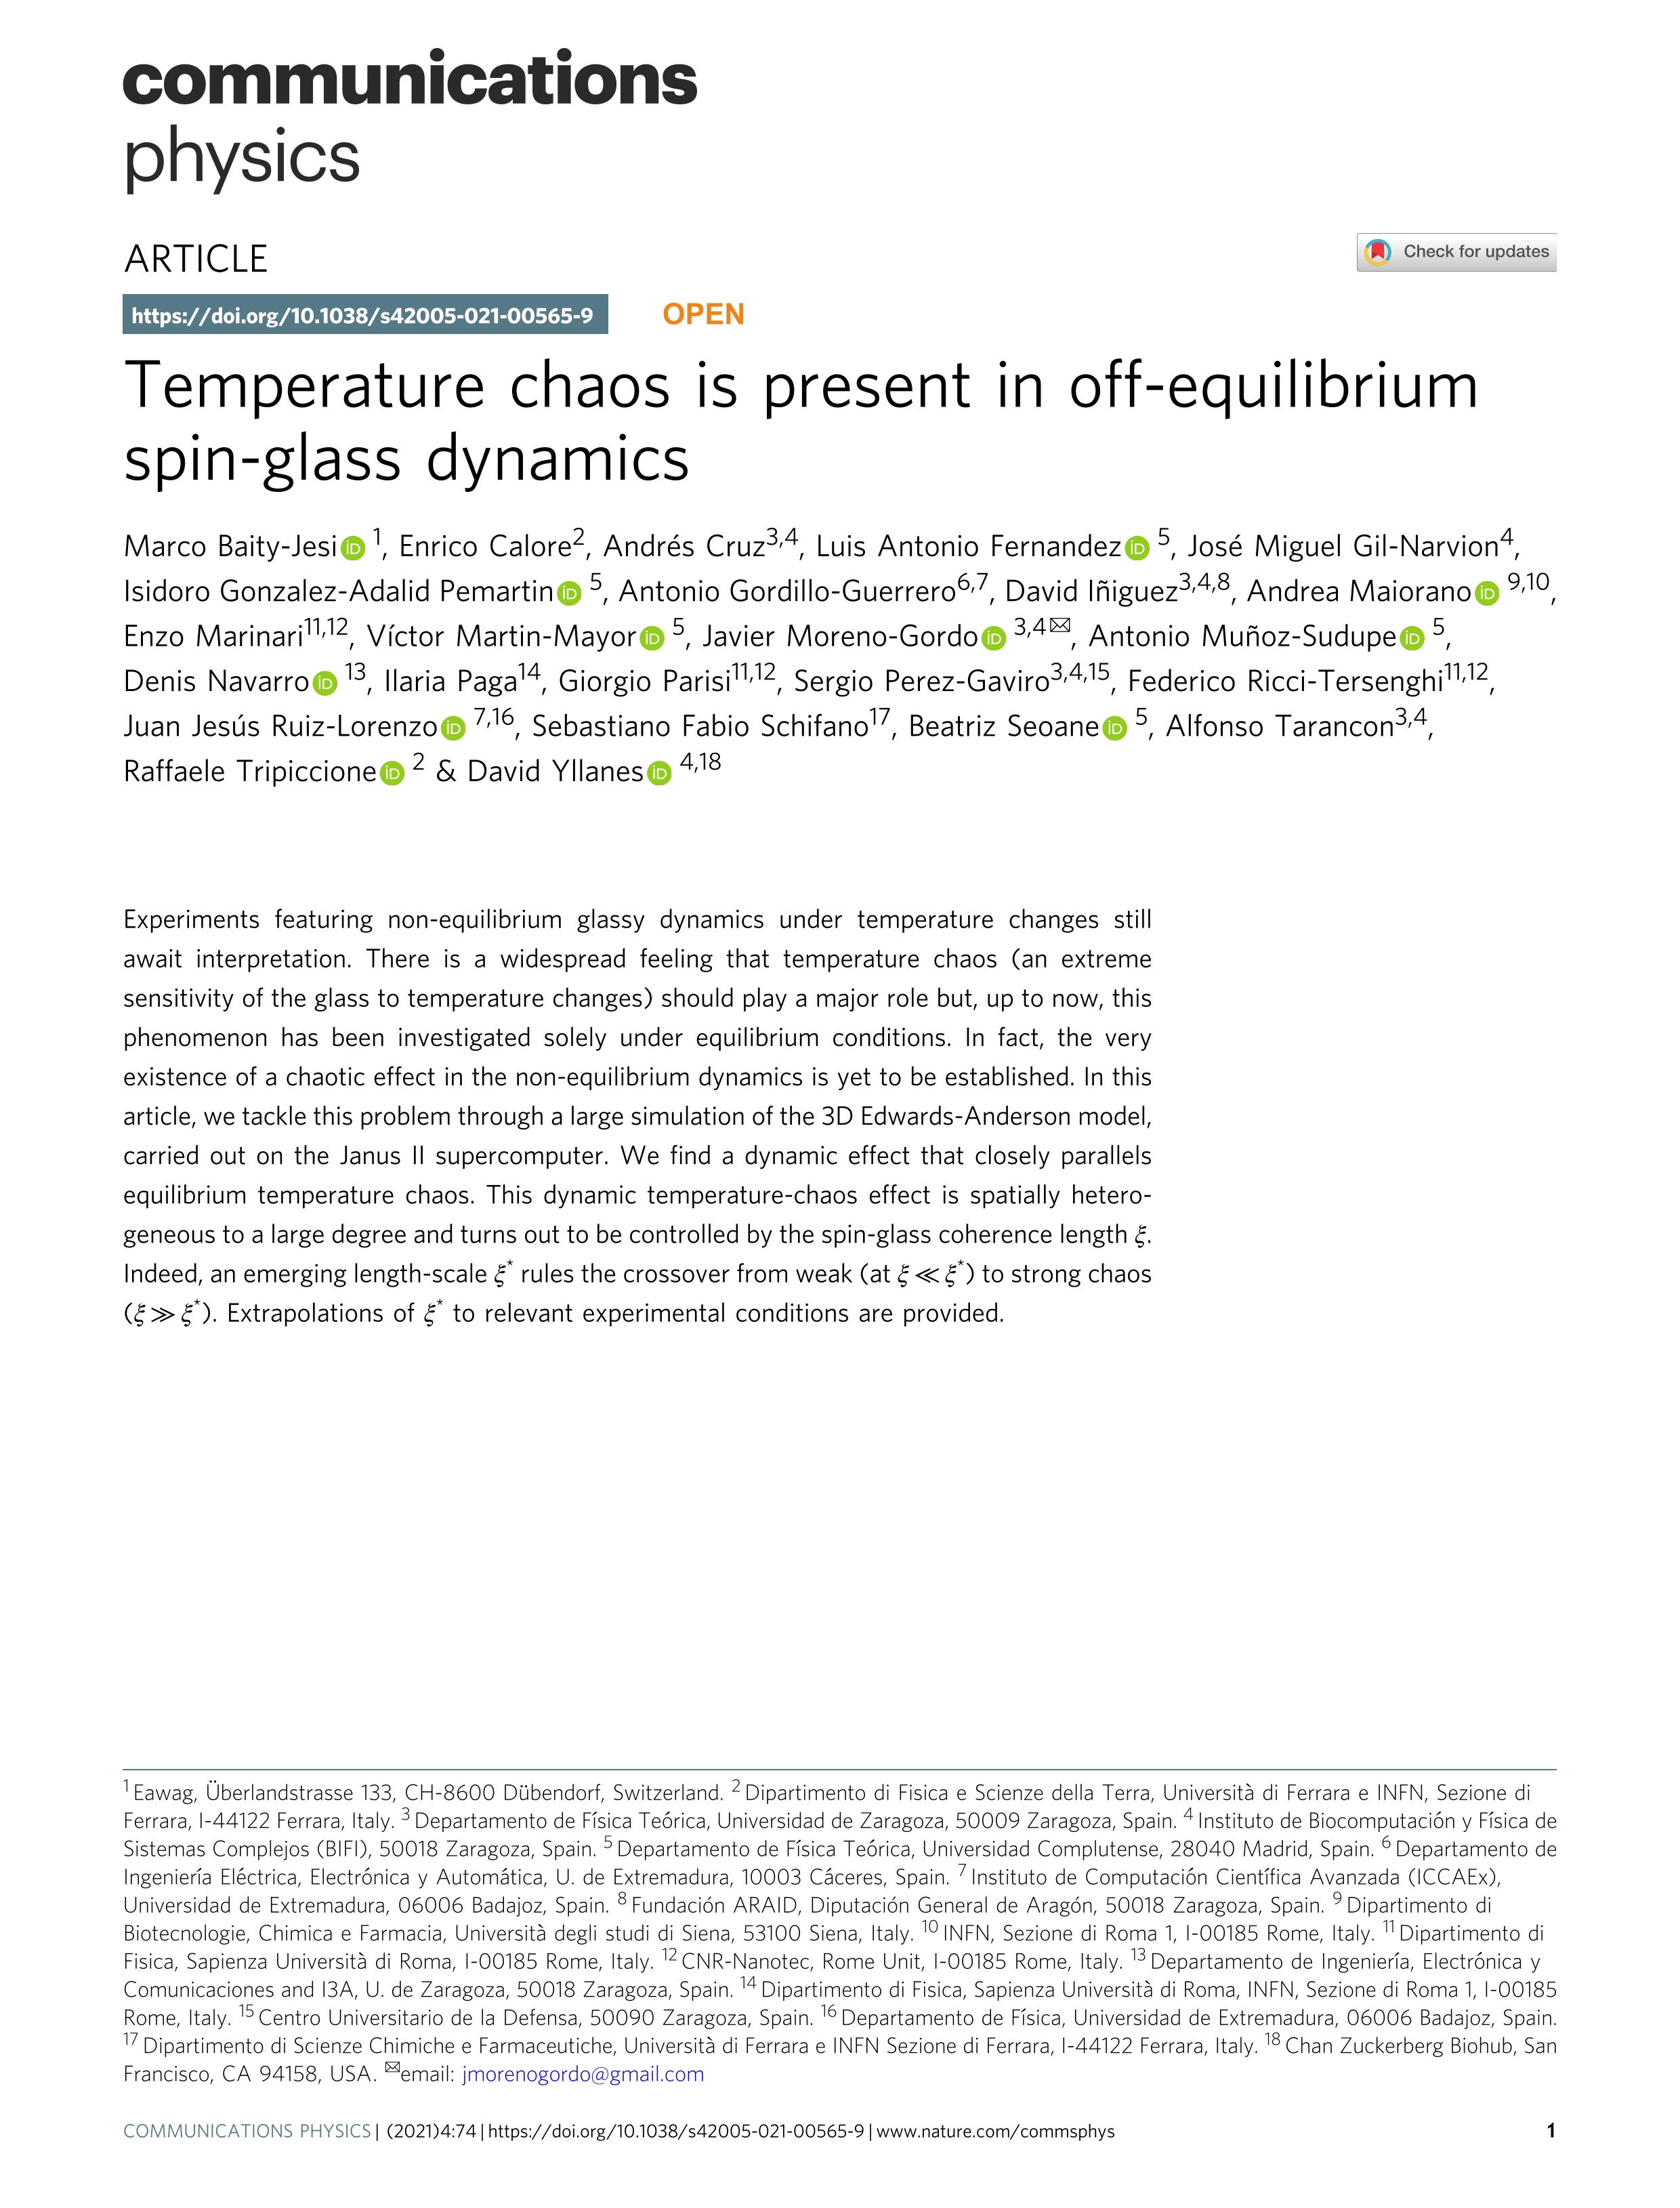 Temperature chaos is present in off-equilibrium spin-glass dynamics